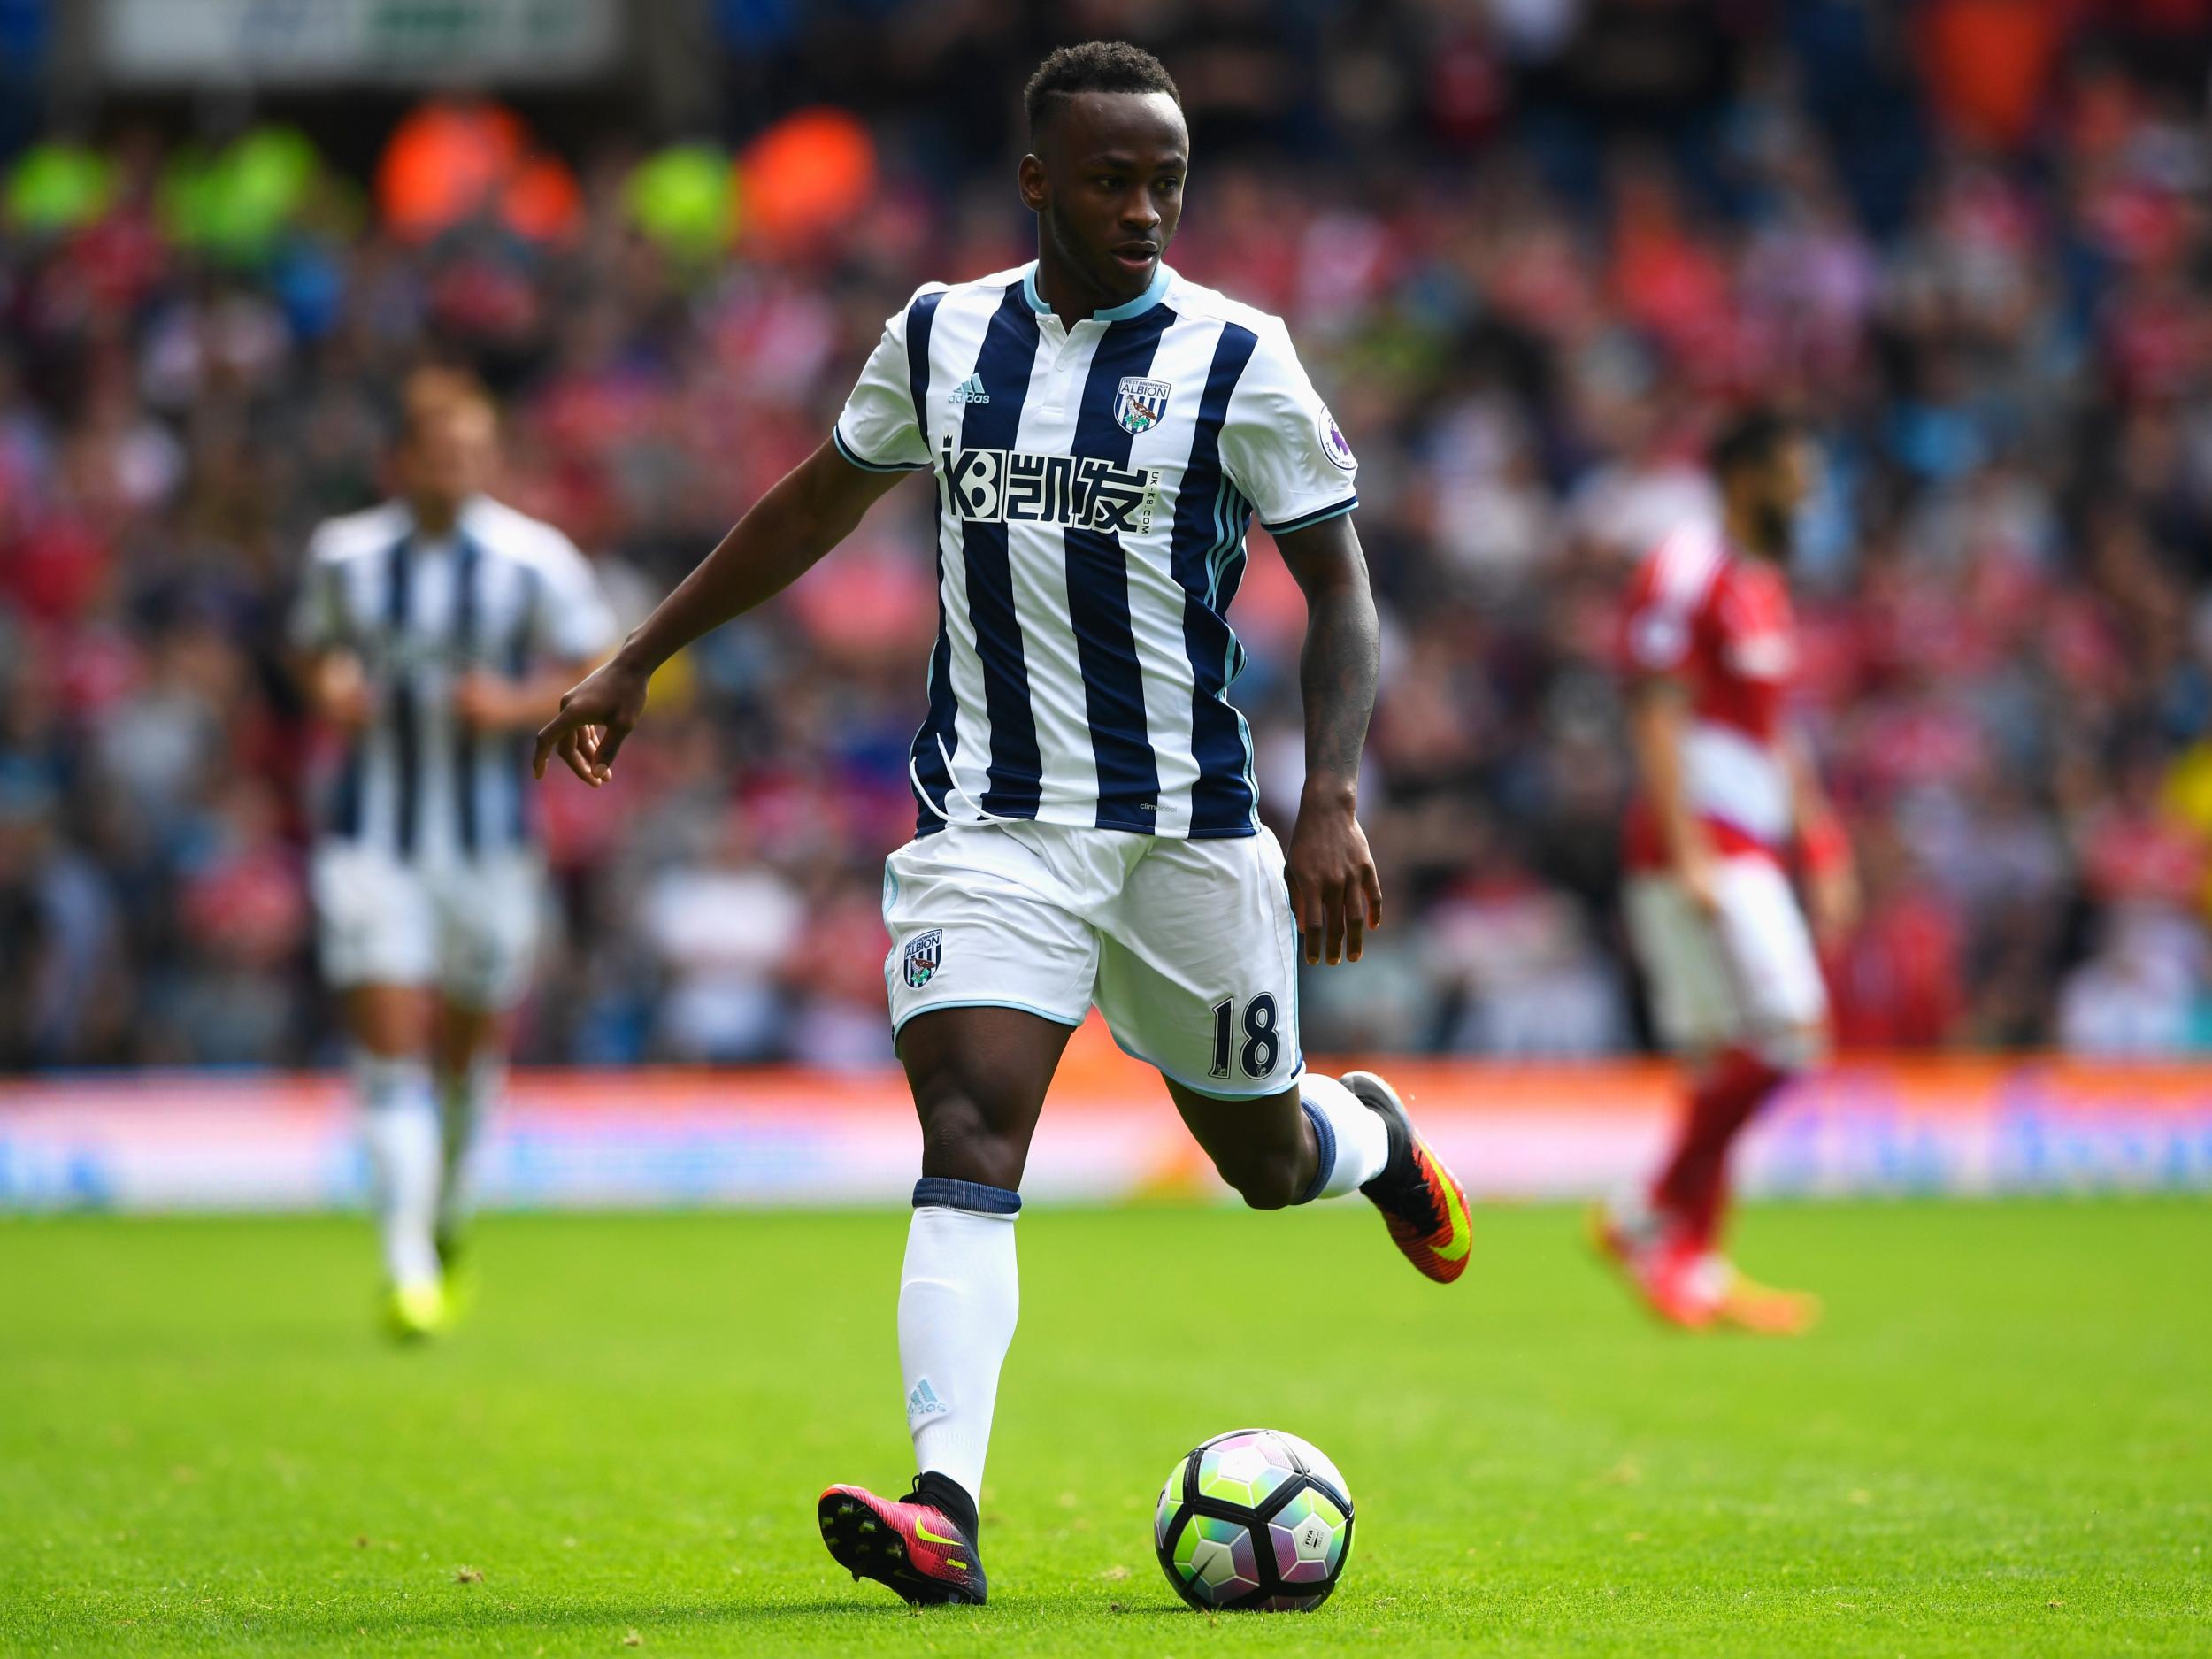 &#13;
Berahino had been frozen out at West Brom (Getty)&#13;